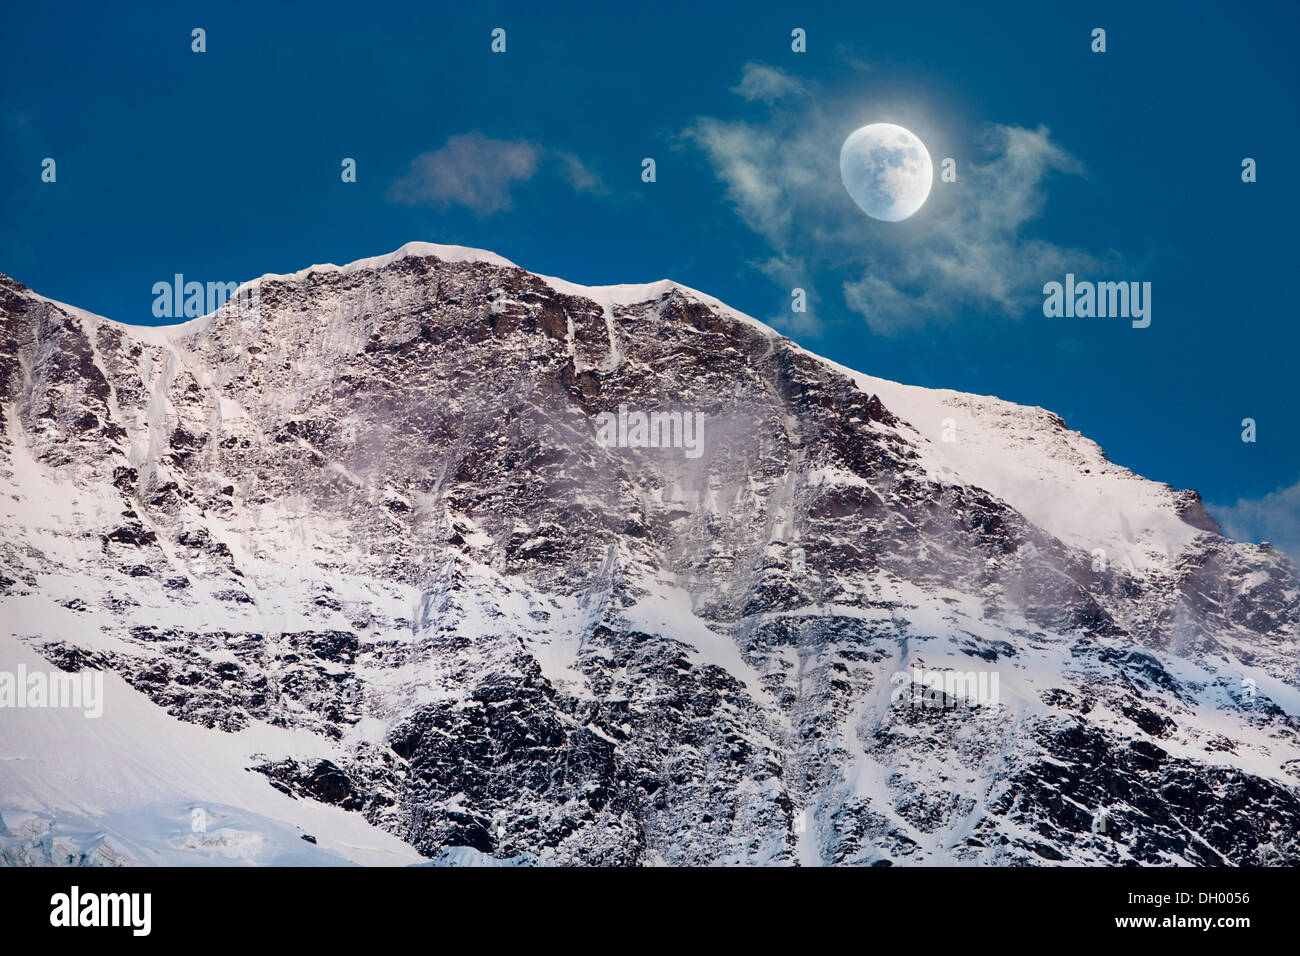 Moon over the Bernese Alps, Grimmelwald, Bernese Oberland, Switzerland, Europe Stock Photo